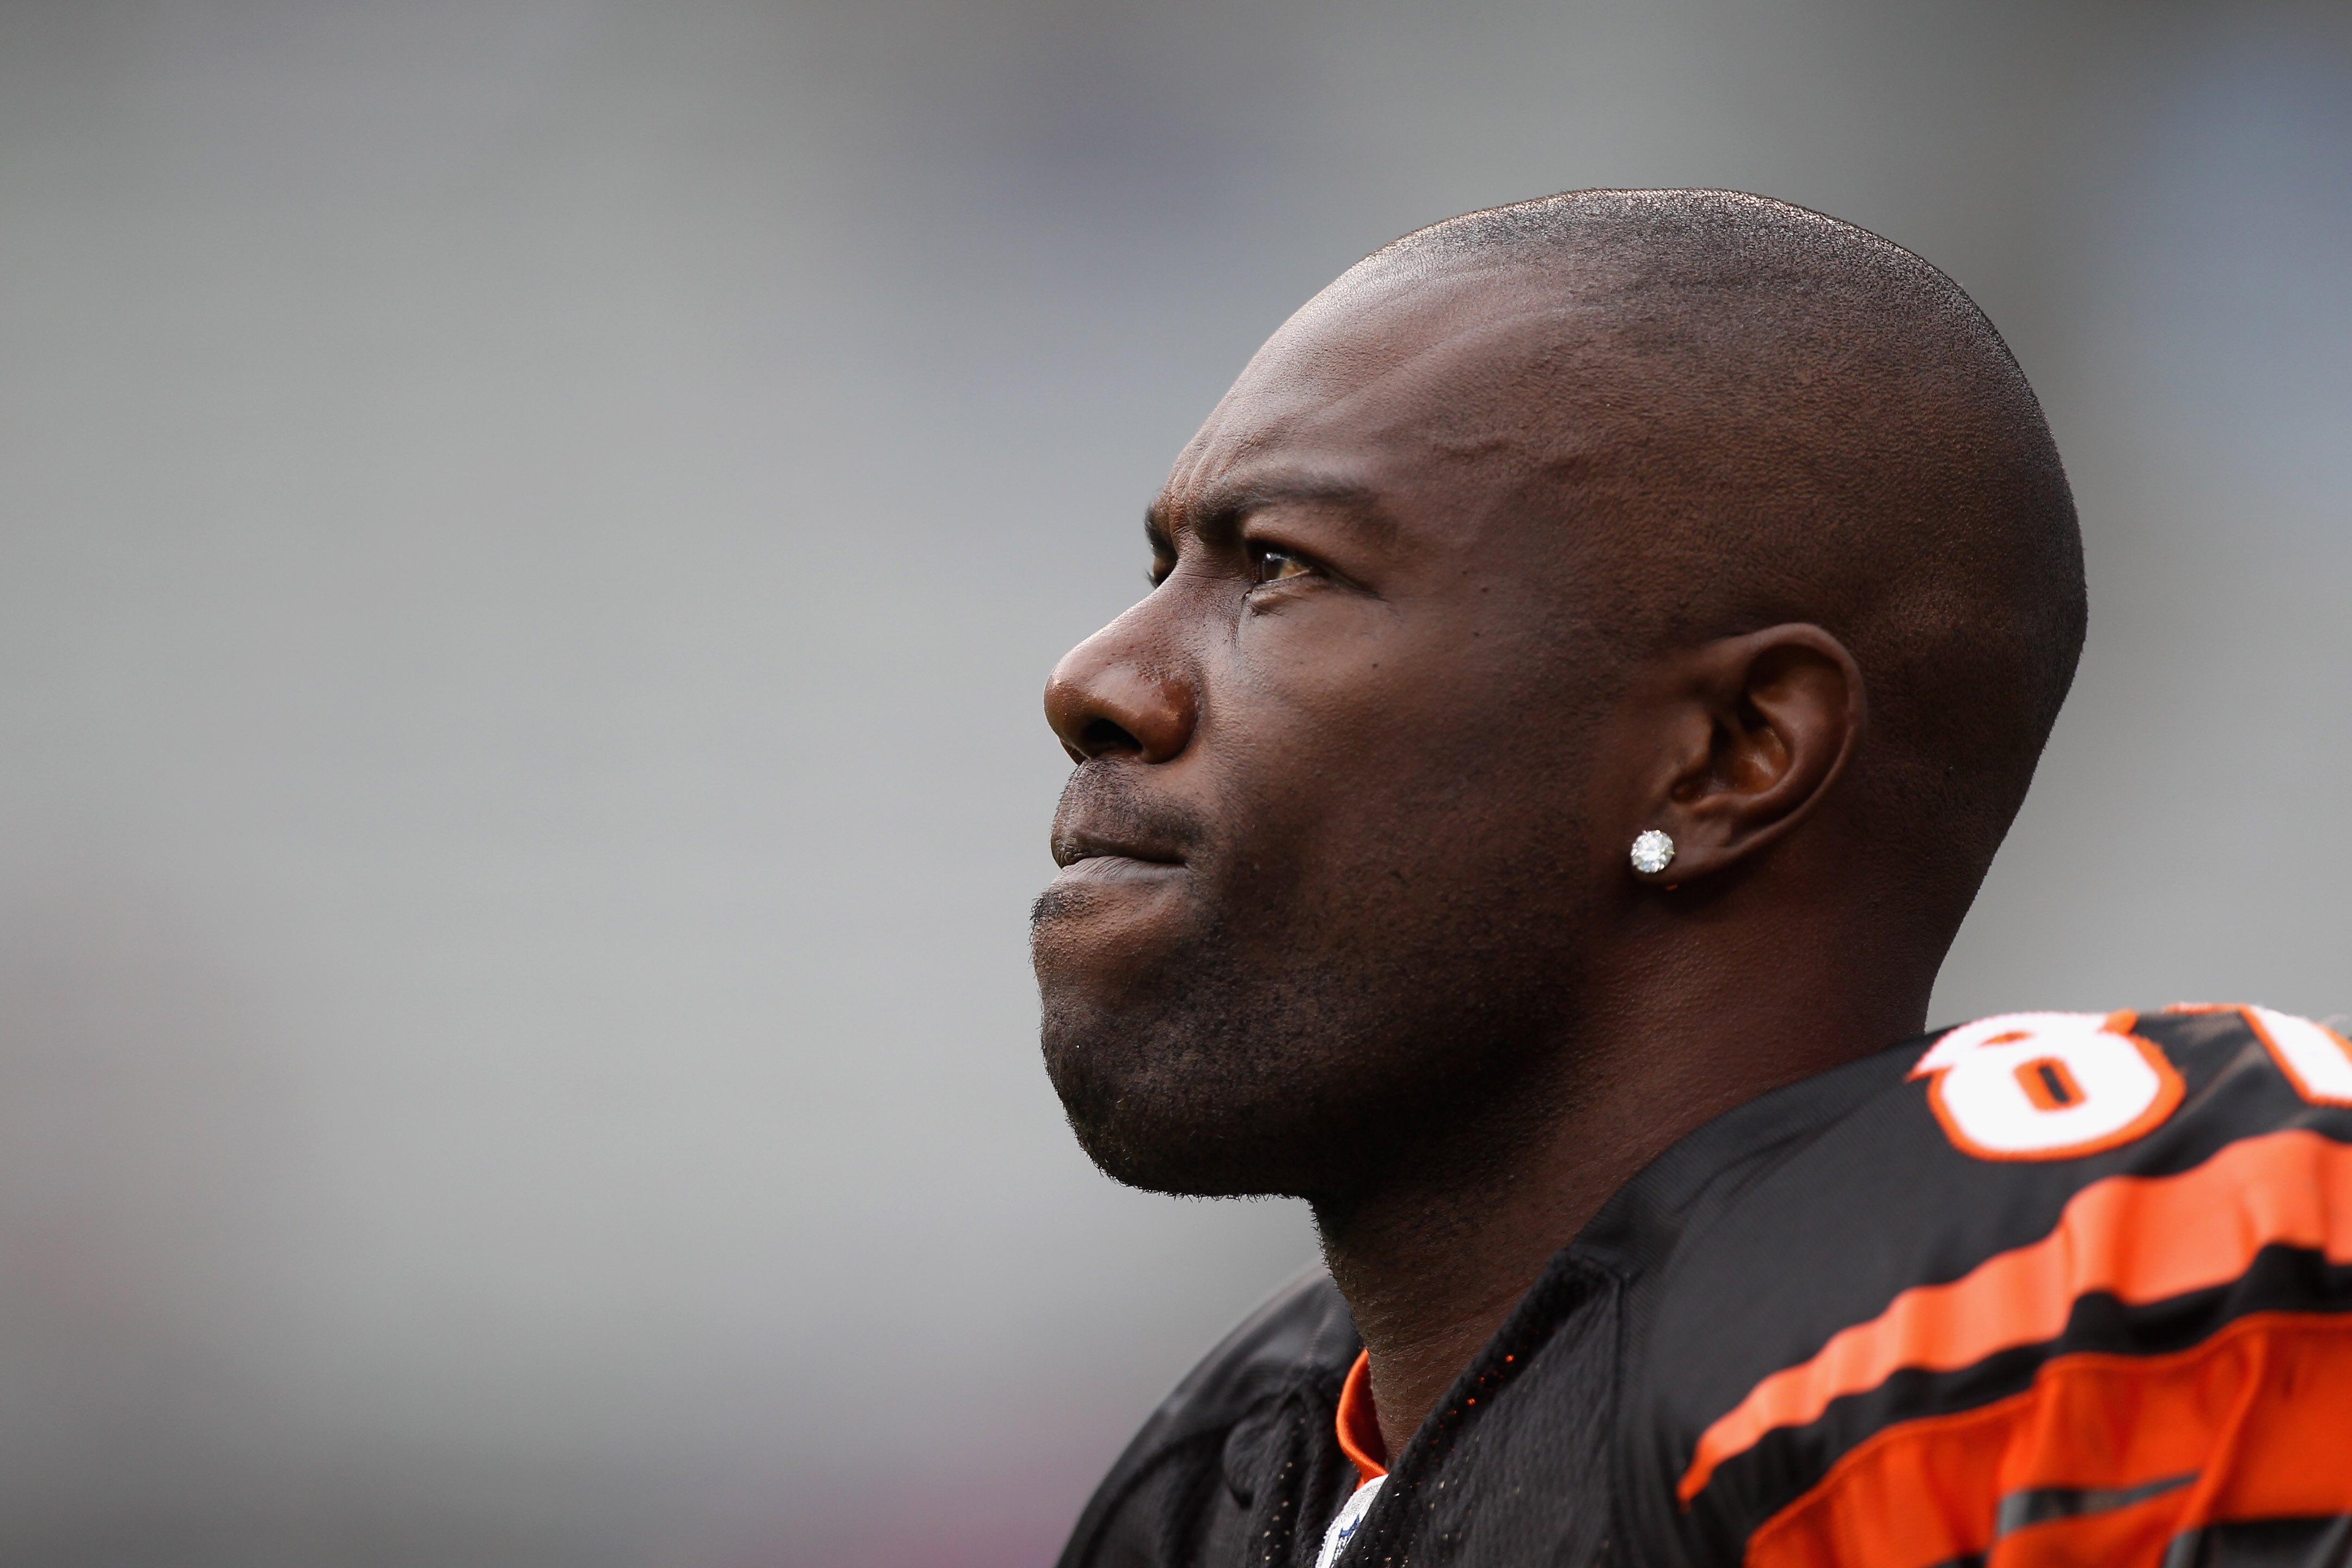 CHARLOTTE, NC - SEPTEMBER 26:  Terrell Owens #81 of the Cincinnati Bengals against the Carolina Panthers during their game at Bank of America Stadium on September 26, 2010 in Charlotte, North Carolina.  (Photo by Streeter Lecka/Getty Images)